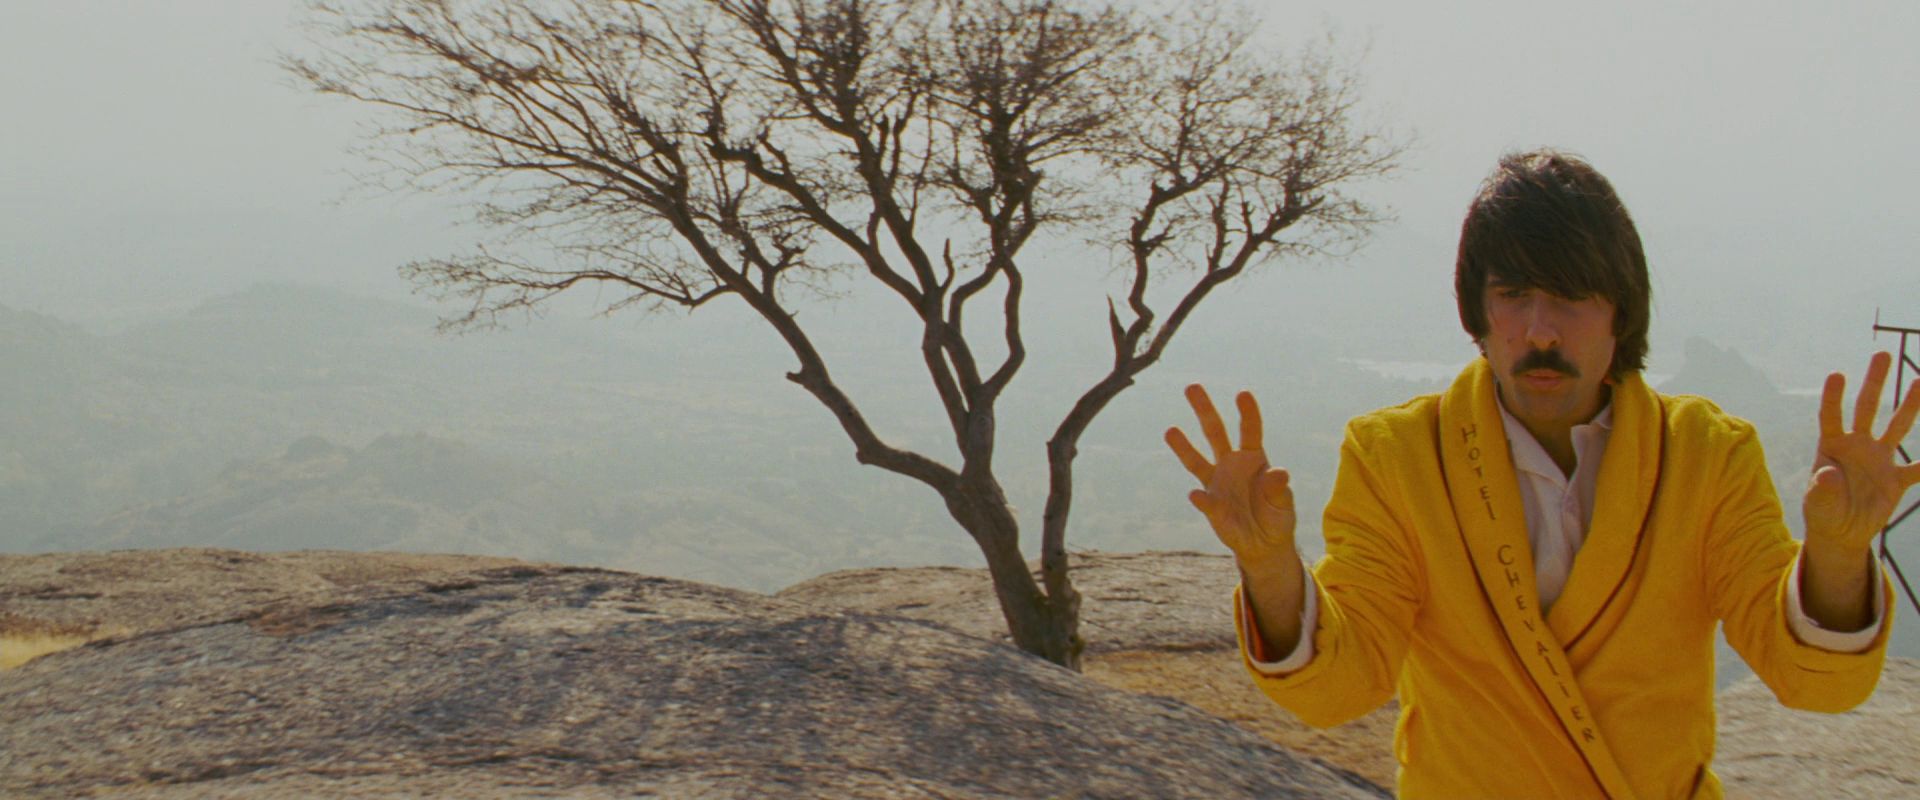 The Darjeeling Limited  Wes anderson movies, Darjeeling limited, Wes  anderson films